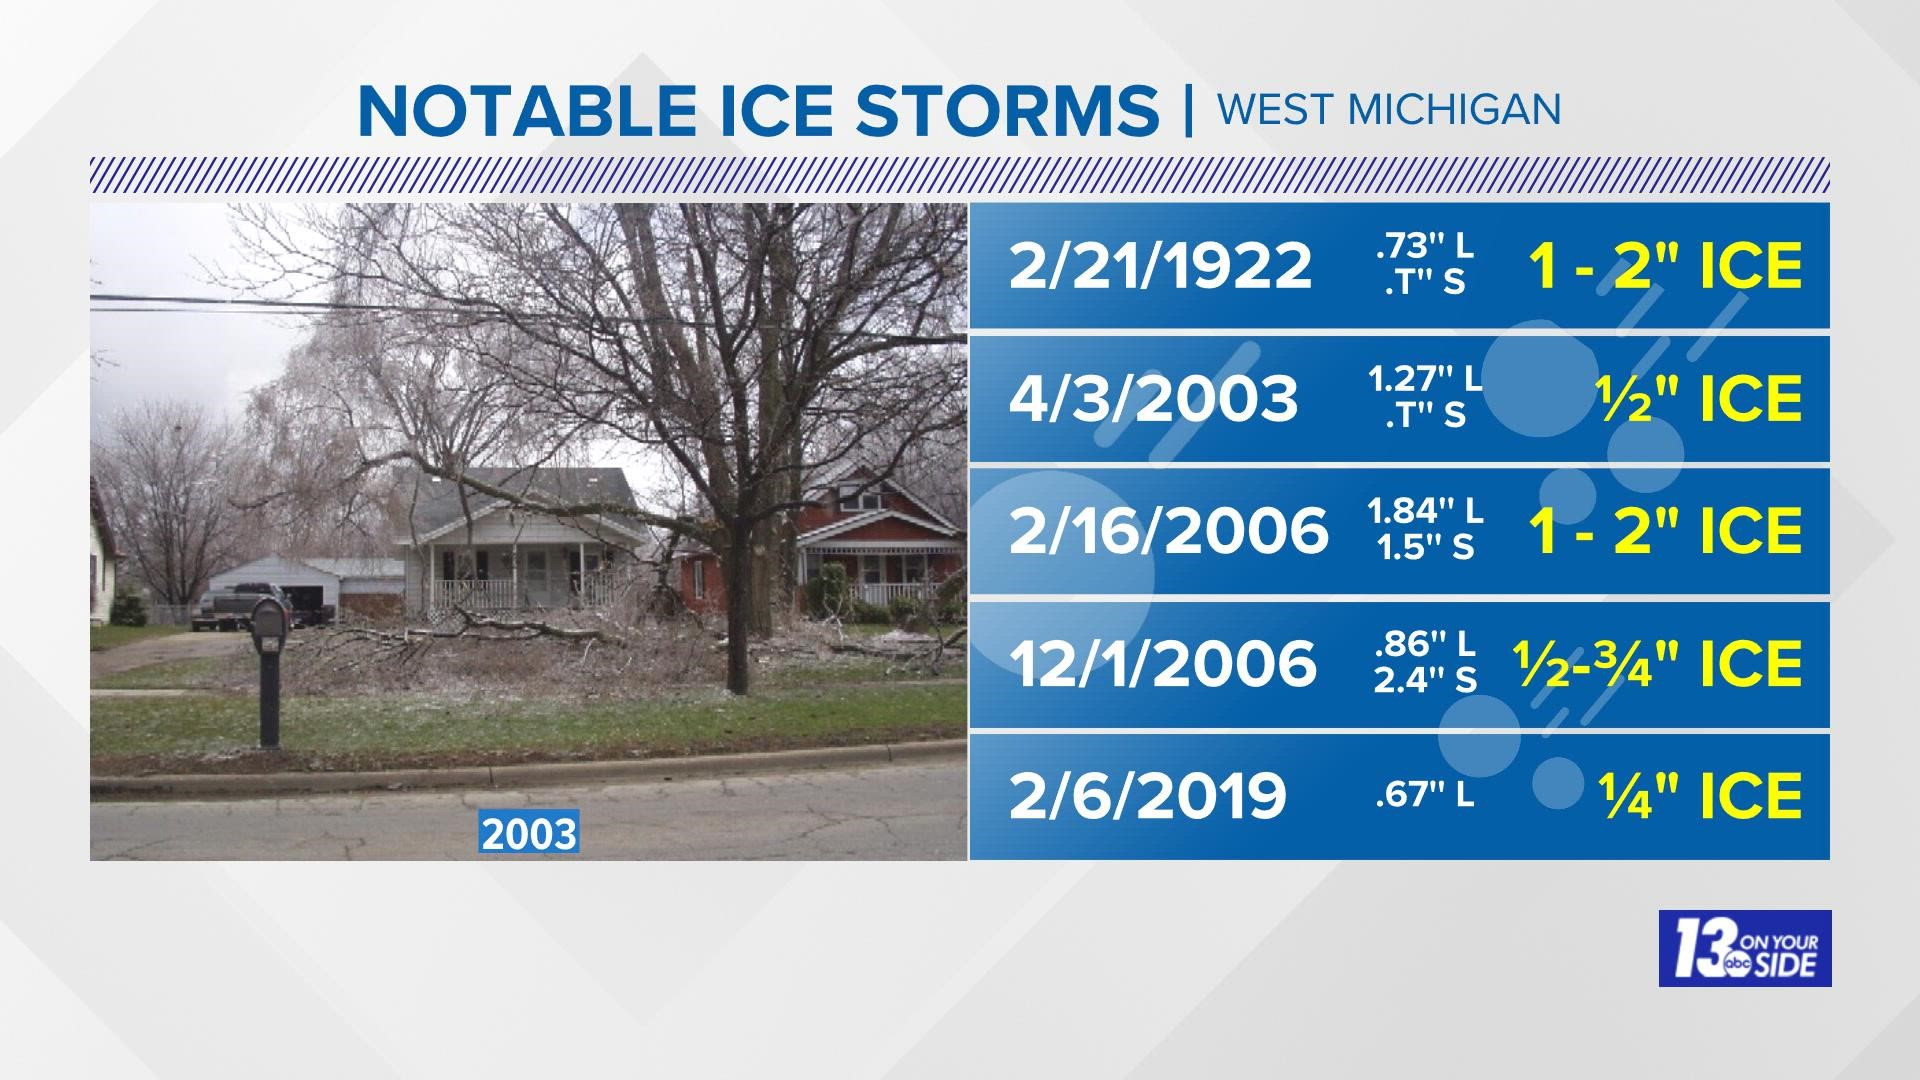 Notable ice storms in West Michigan resulting from heavy freezing rain and sleet.